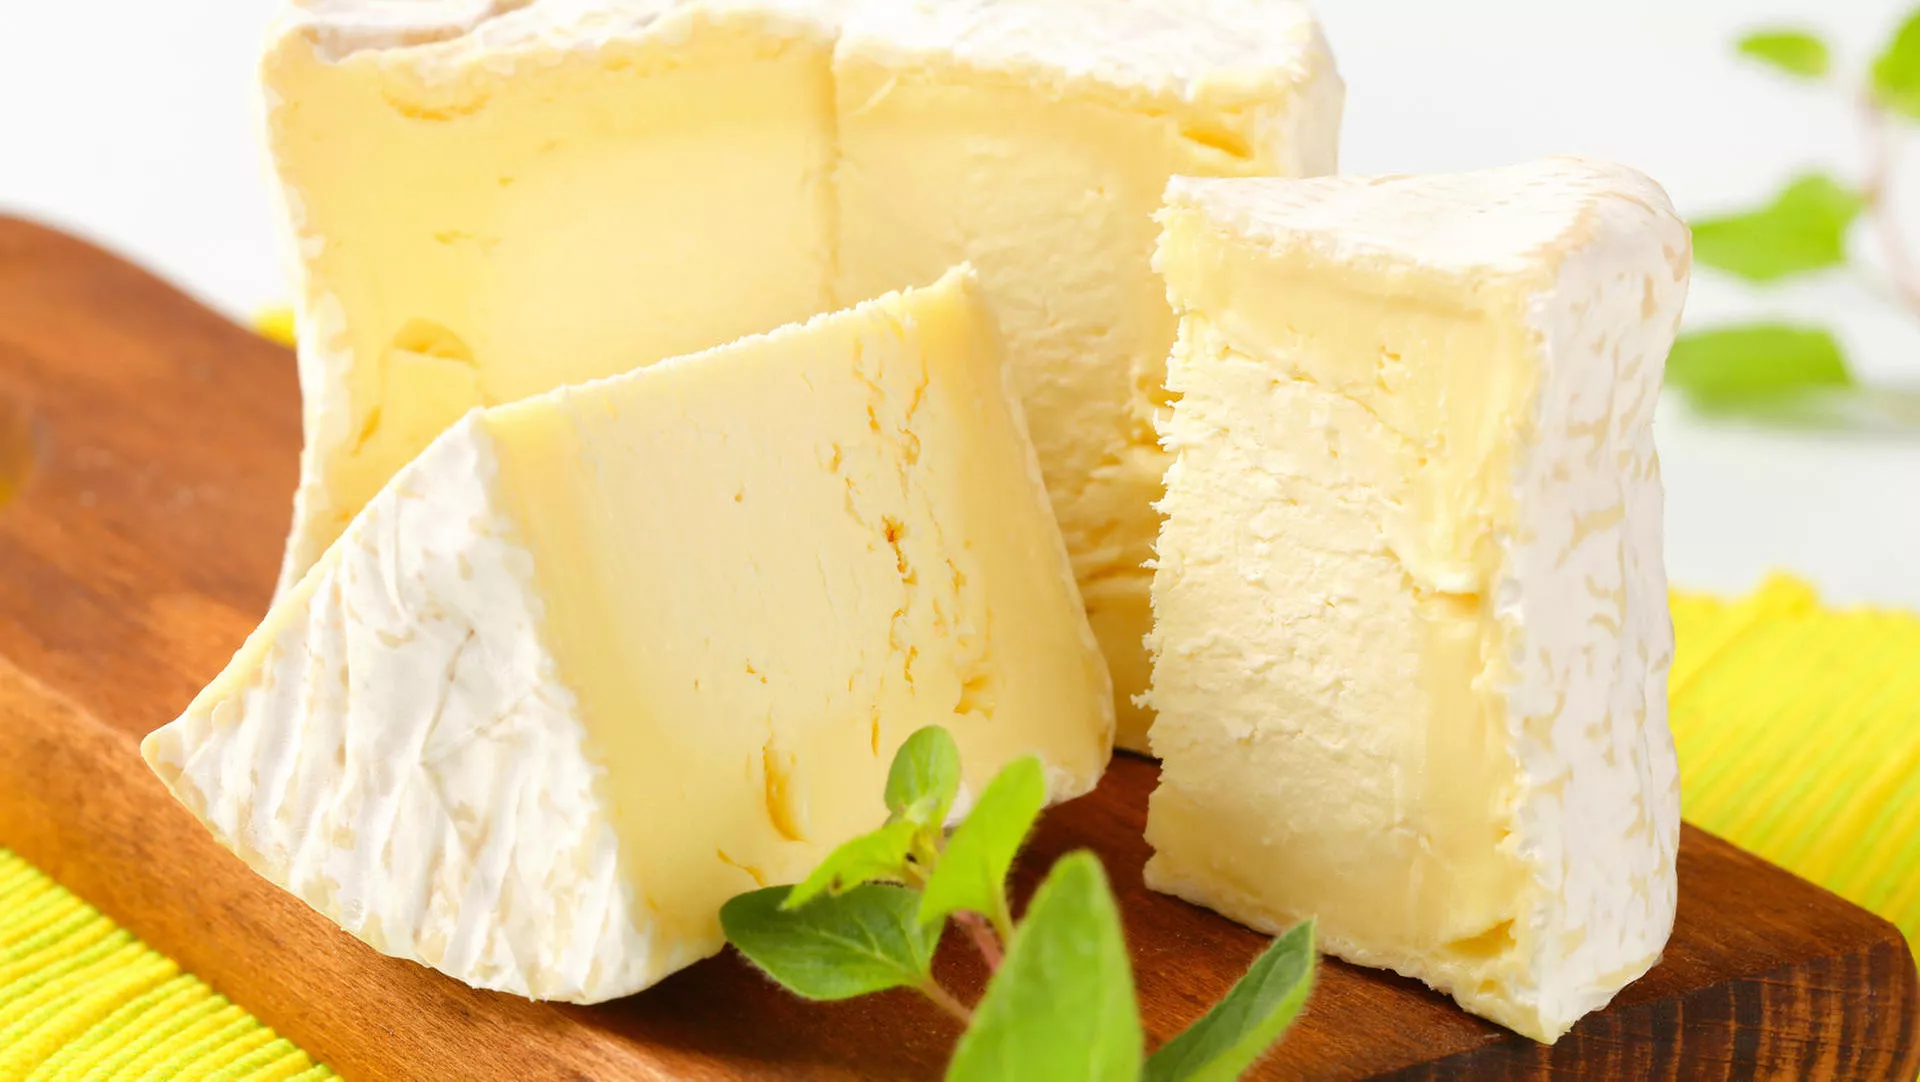 Bellonte Farm in France, Europe | Cheesemakers - Rated 0.9